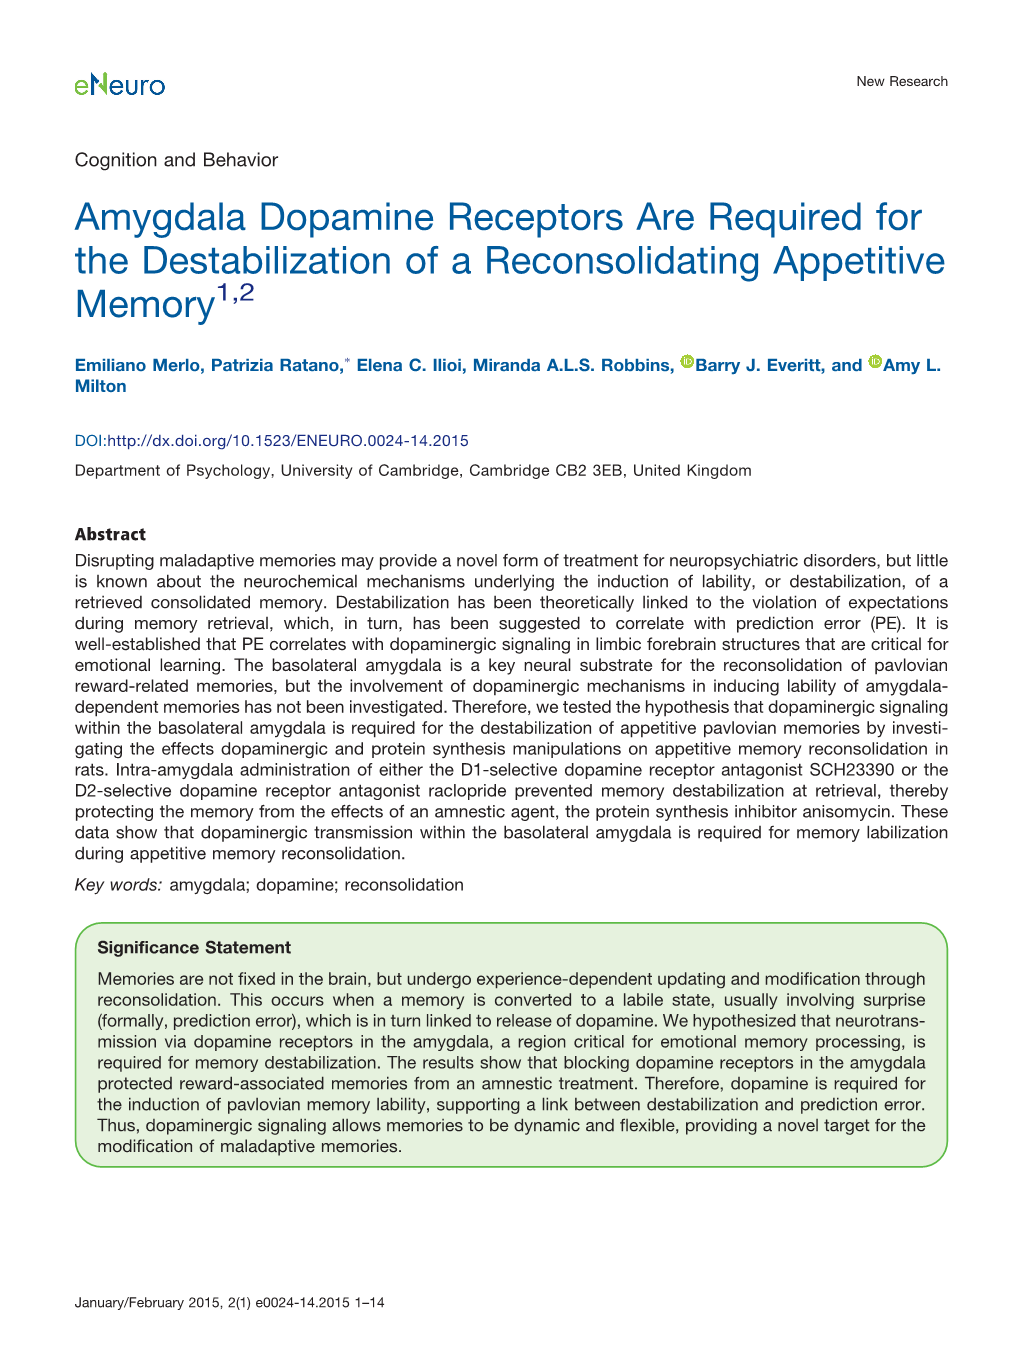 Amygdala Dopamine Receptors Are Required for the Destabilization of a Reconsolidating Appetitive Memory1,2